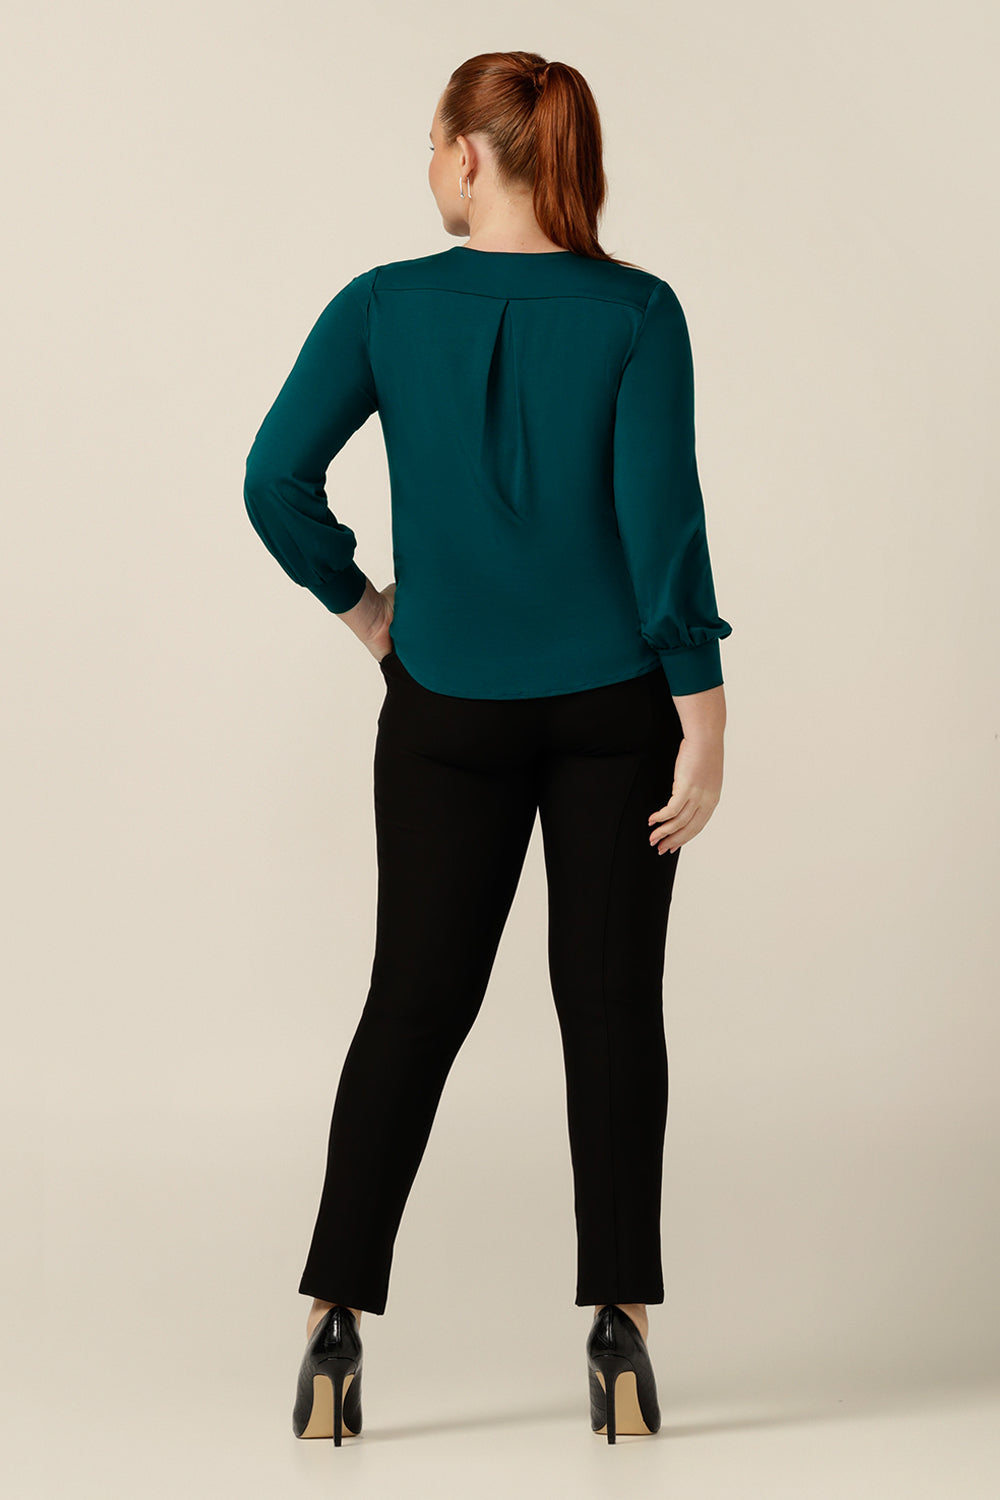 Back view of a size 12, curvy woman wearing a long sleeve, V-neck top in green bamboo jersey with slim-leg, ankle length black pants. Australian-made, the top and pants create a smart-casual workwear outfit. 